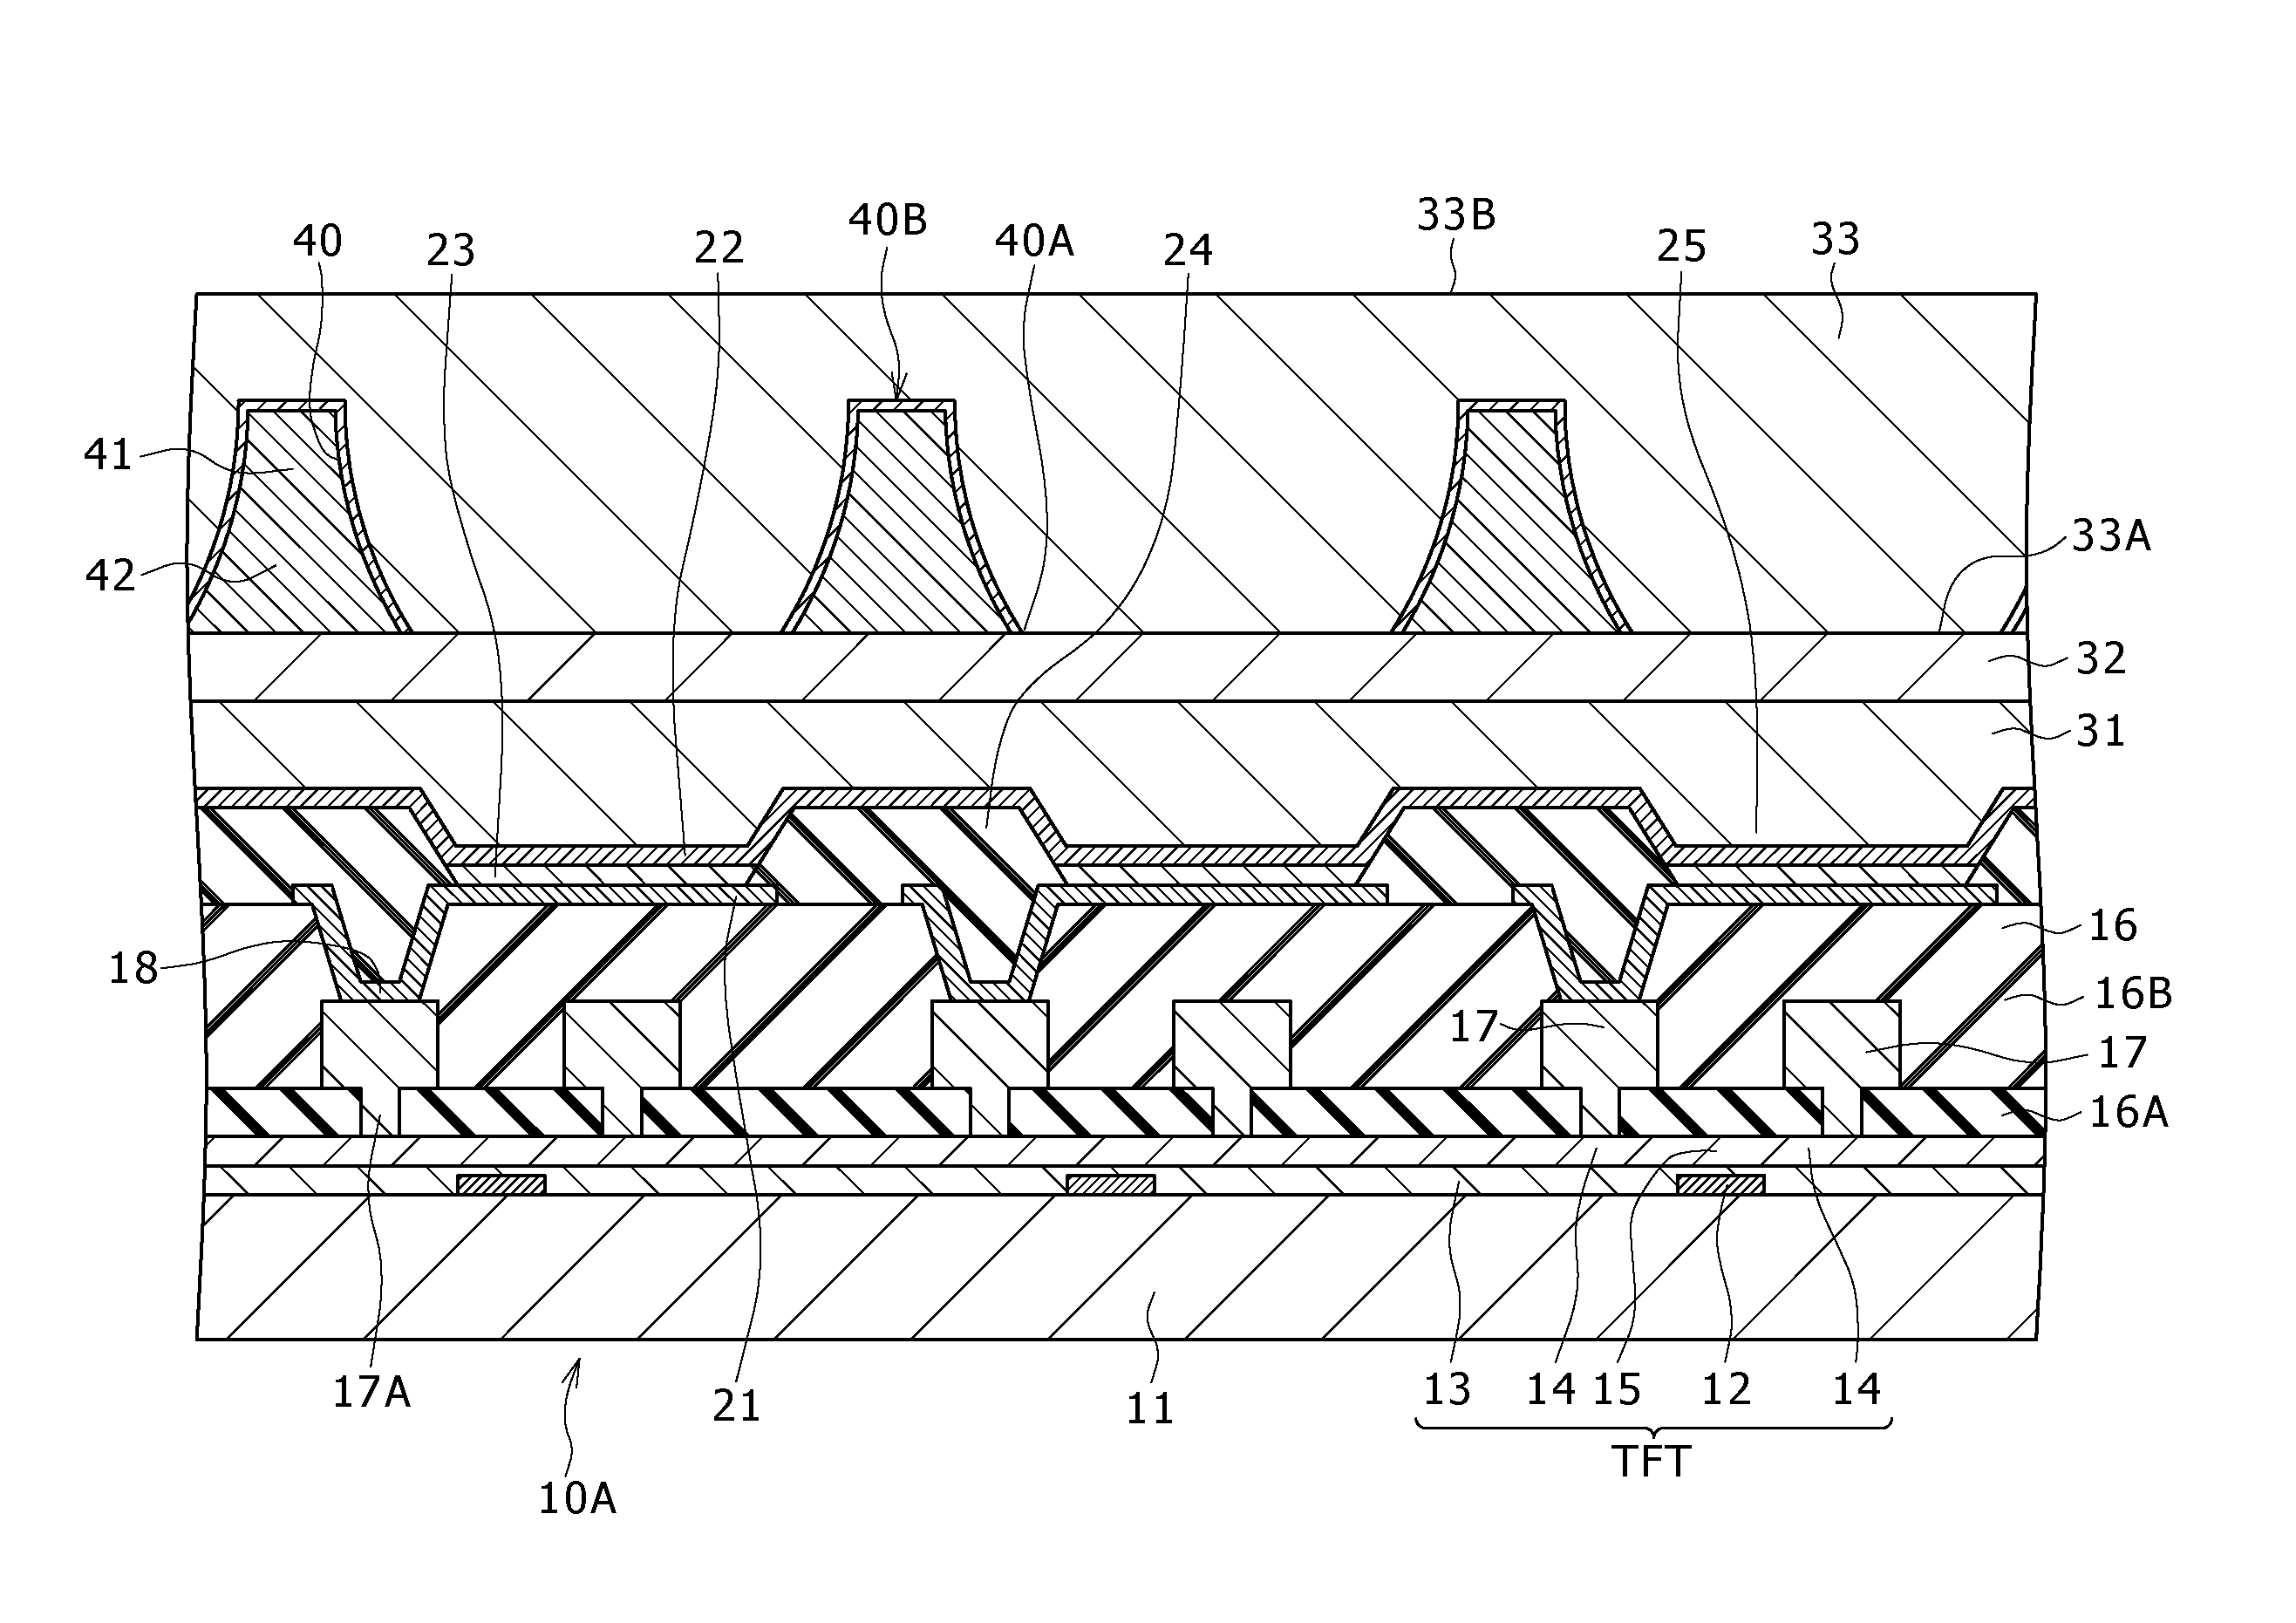 Display device having parabolic light reflecting portions for enhanced extraction of light